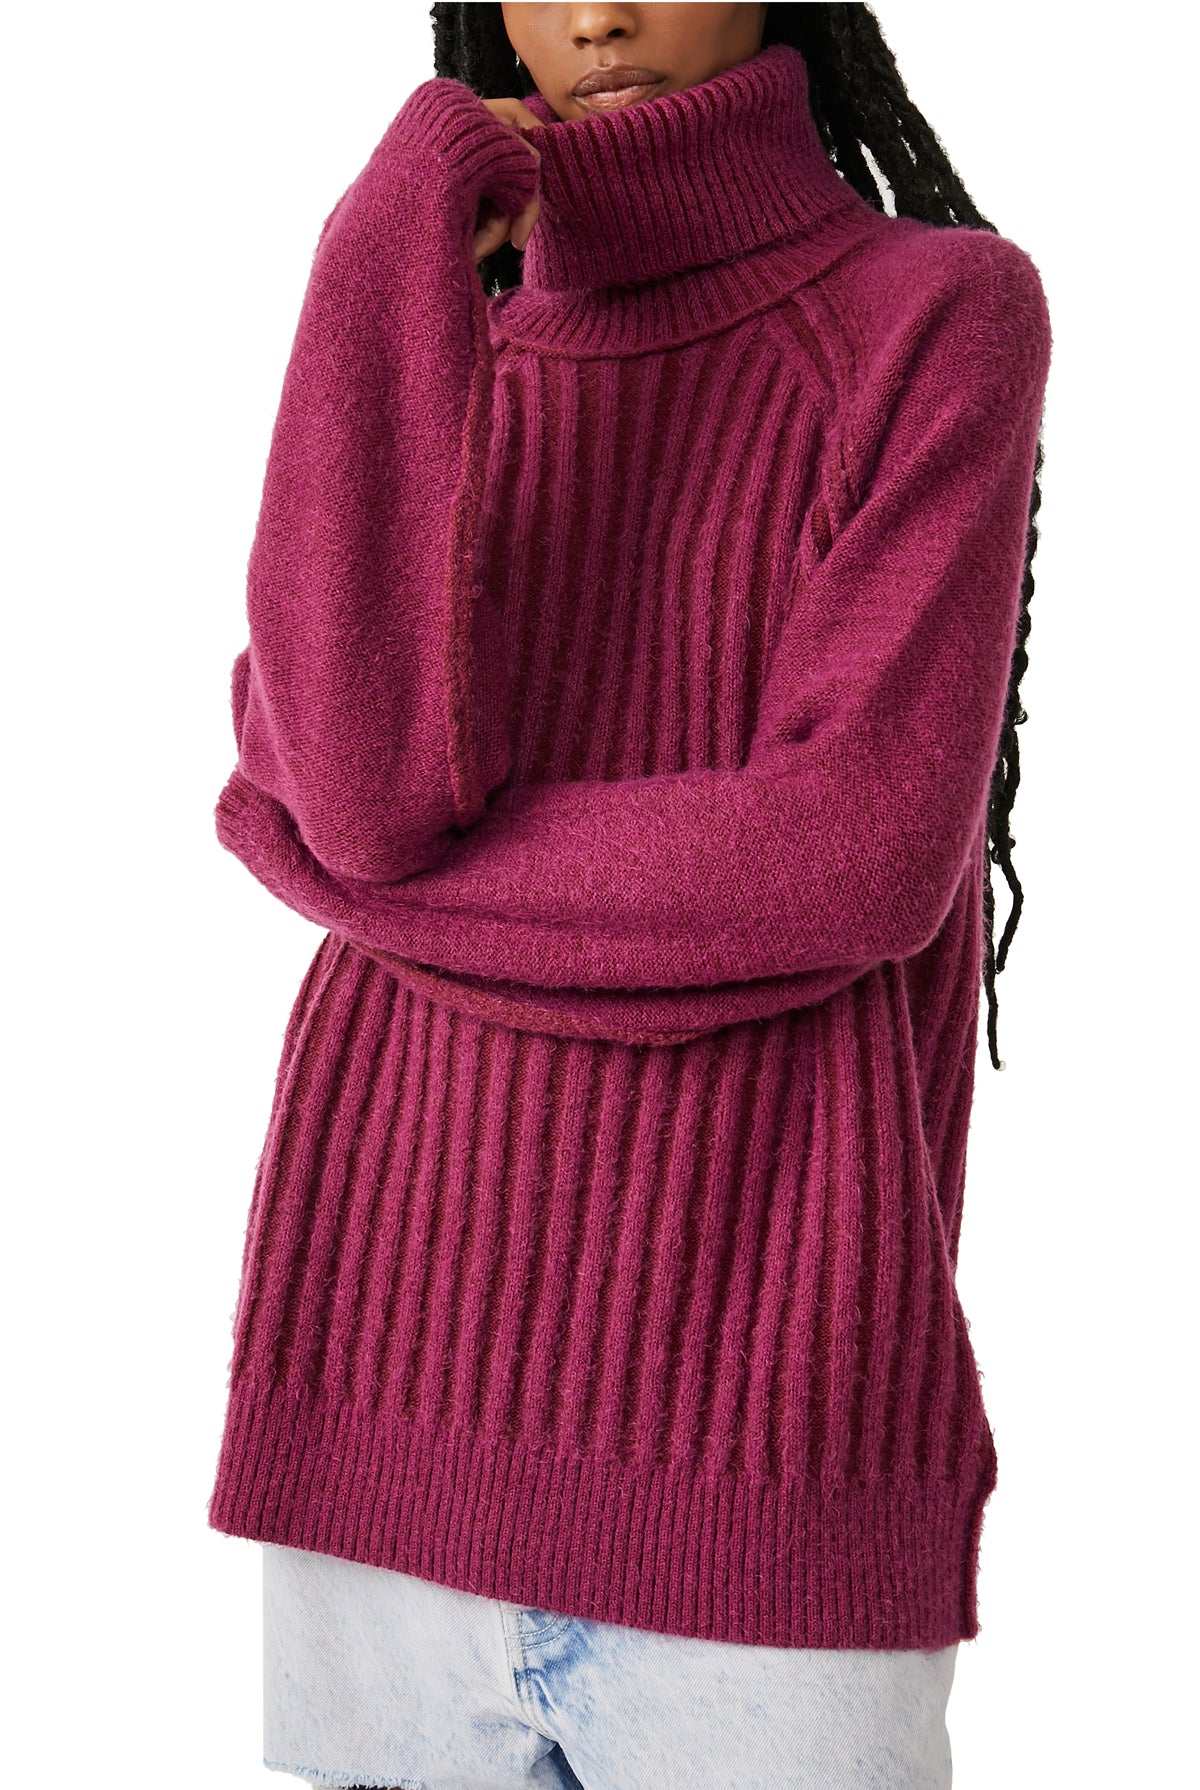 Free People Big City Turtleneck - Mulberry - S Mulberry